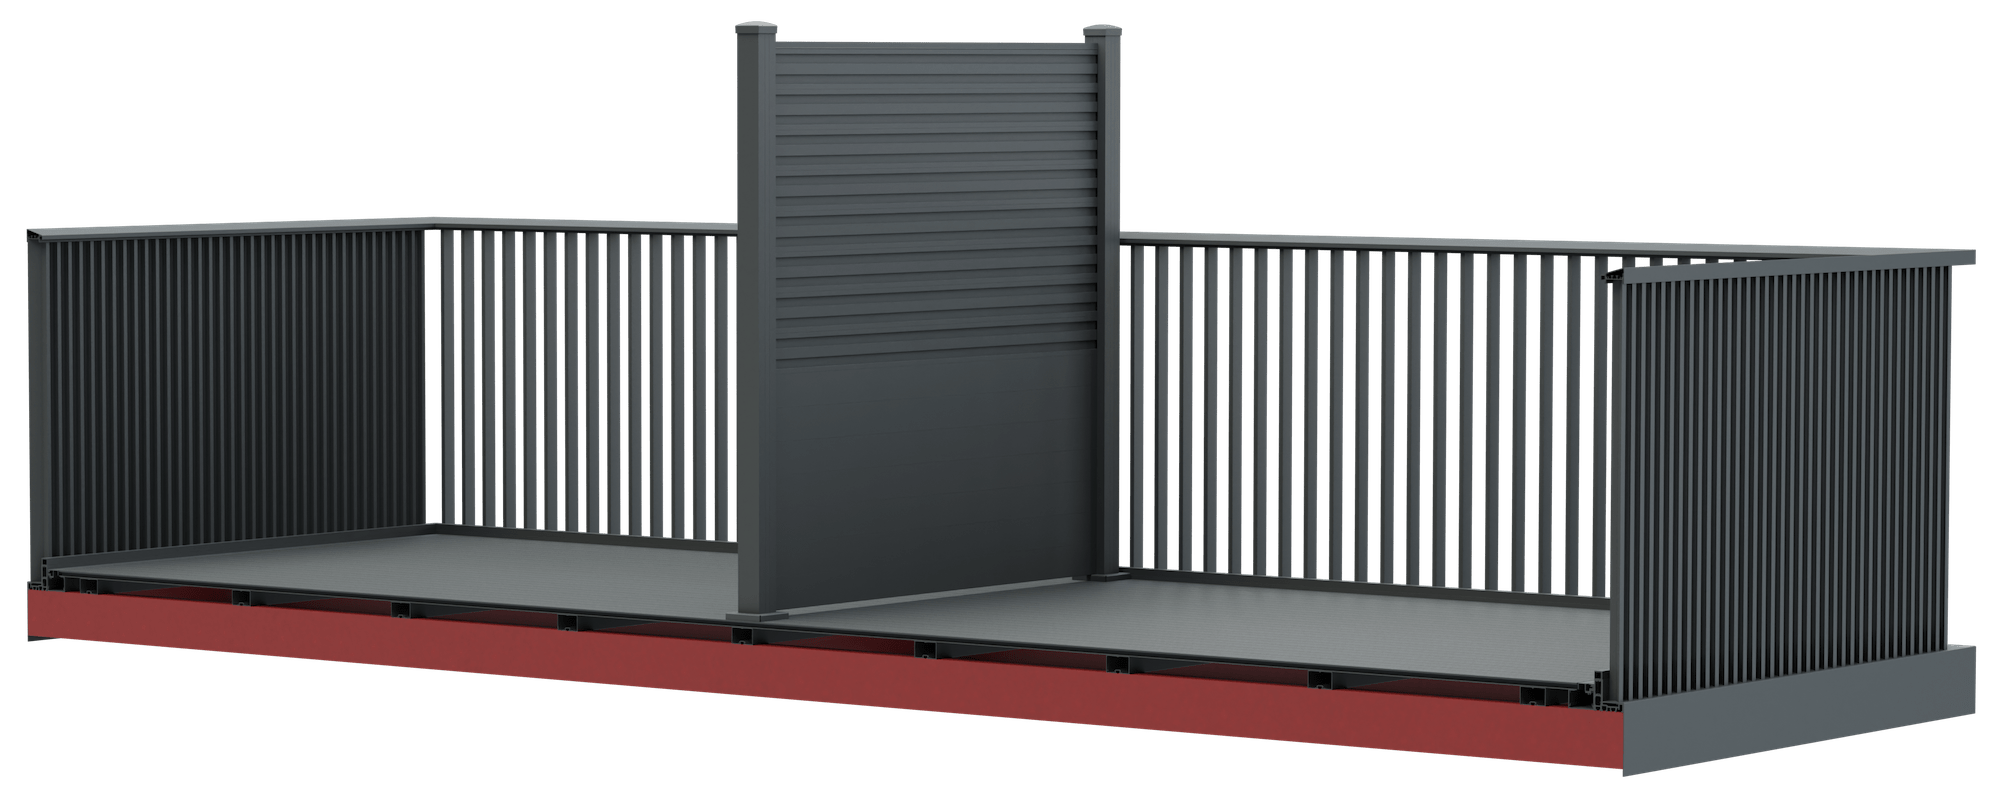 AliDeck-Balcony-Dividers-Fencing-Gates-Privacy-Screens-1-AFence-Divider-1